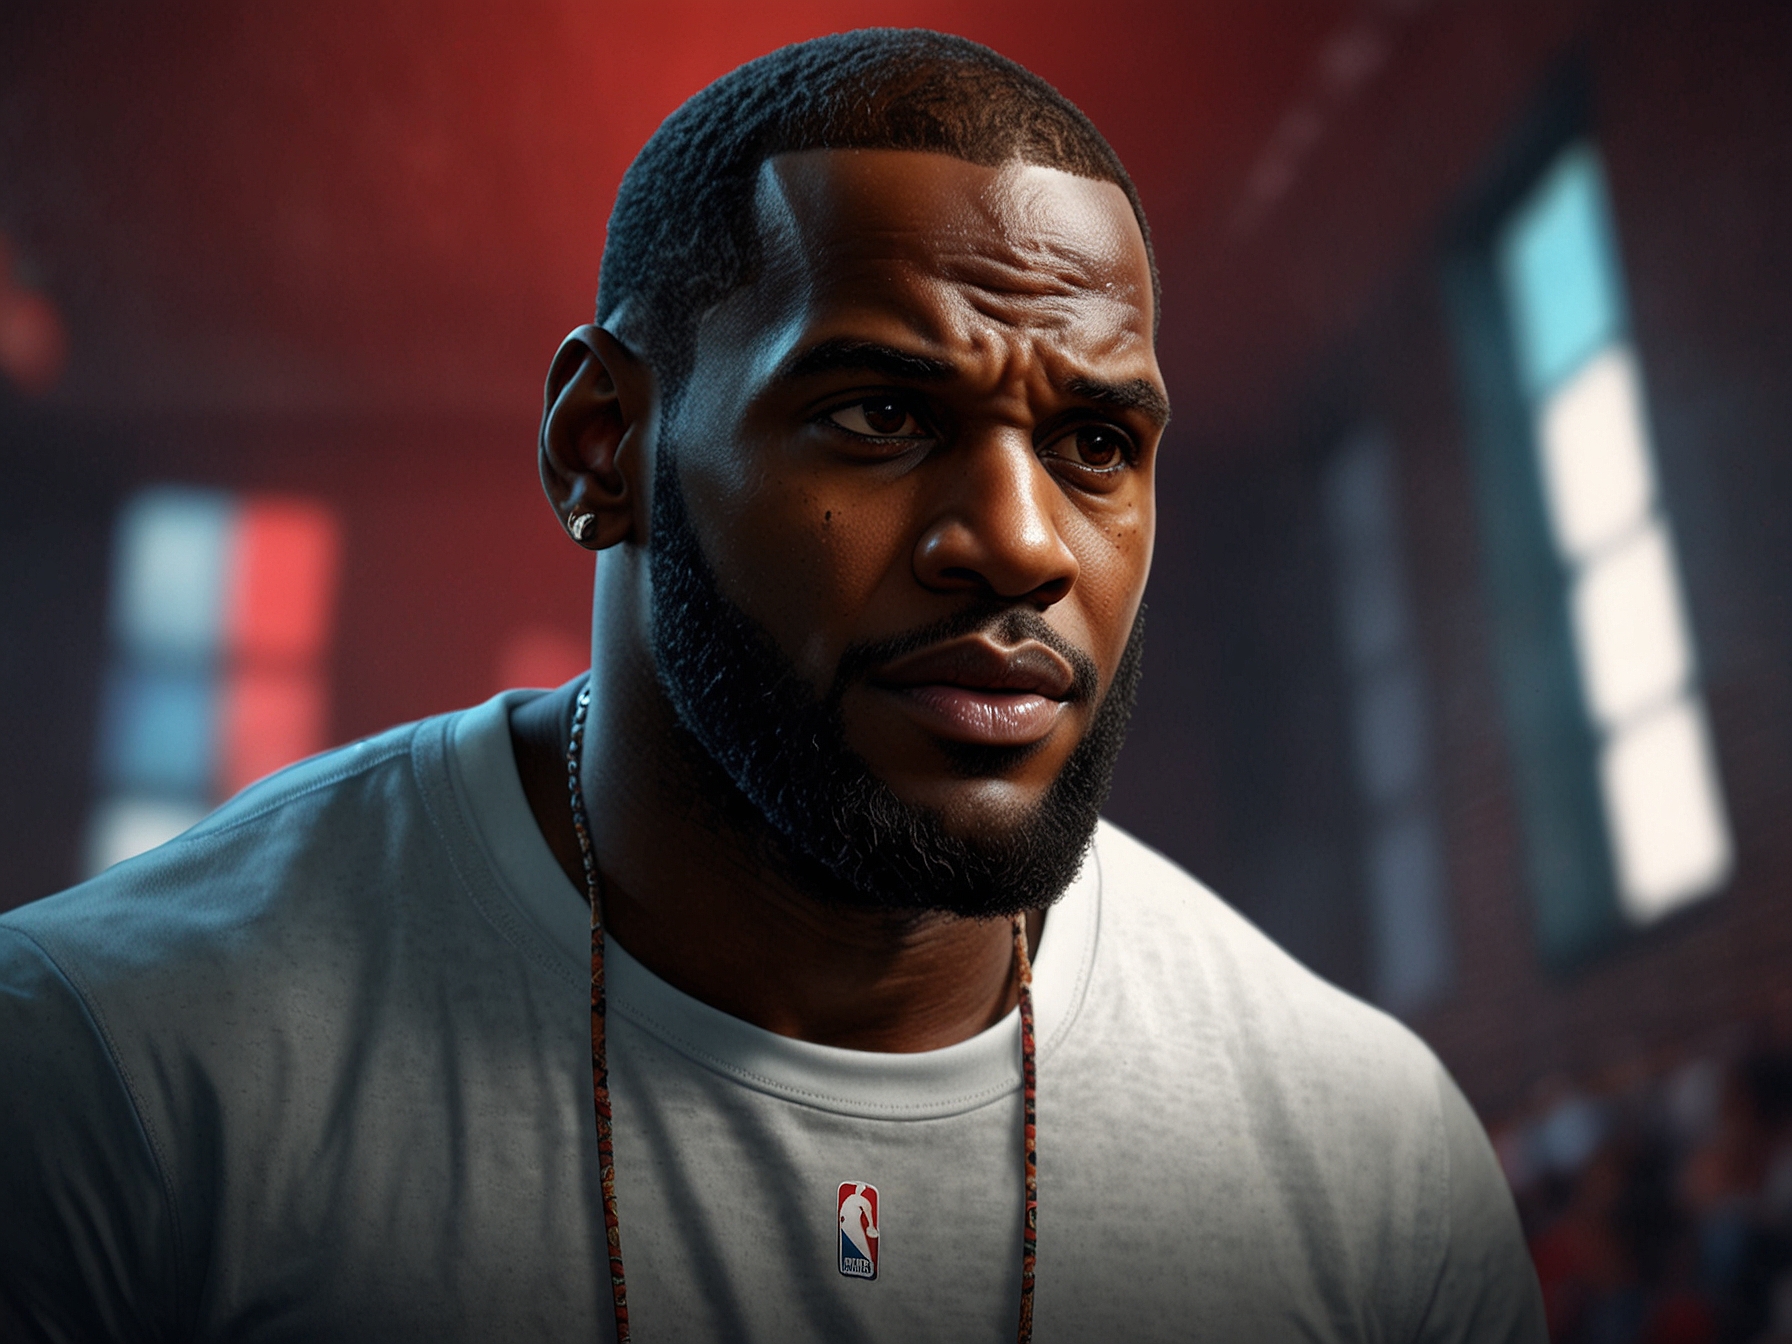 LeBron James featured in a teaser for the new Beats Pill, generating buzz across social media with intrigue and excitement. The setting hints at advanced features and a high-quality design.